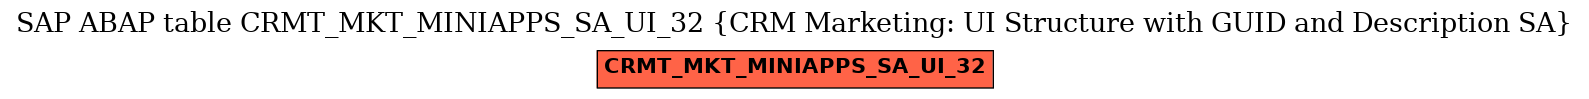 E-R Diagram for table CRMT_MKT_MINIAPPS_SA_UI_32 (CRM Marketing: UI Structure with GUID and Description SA)